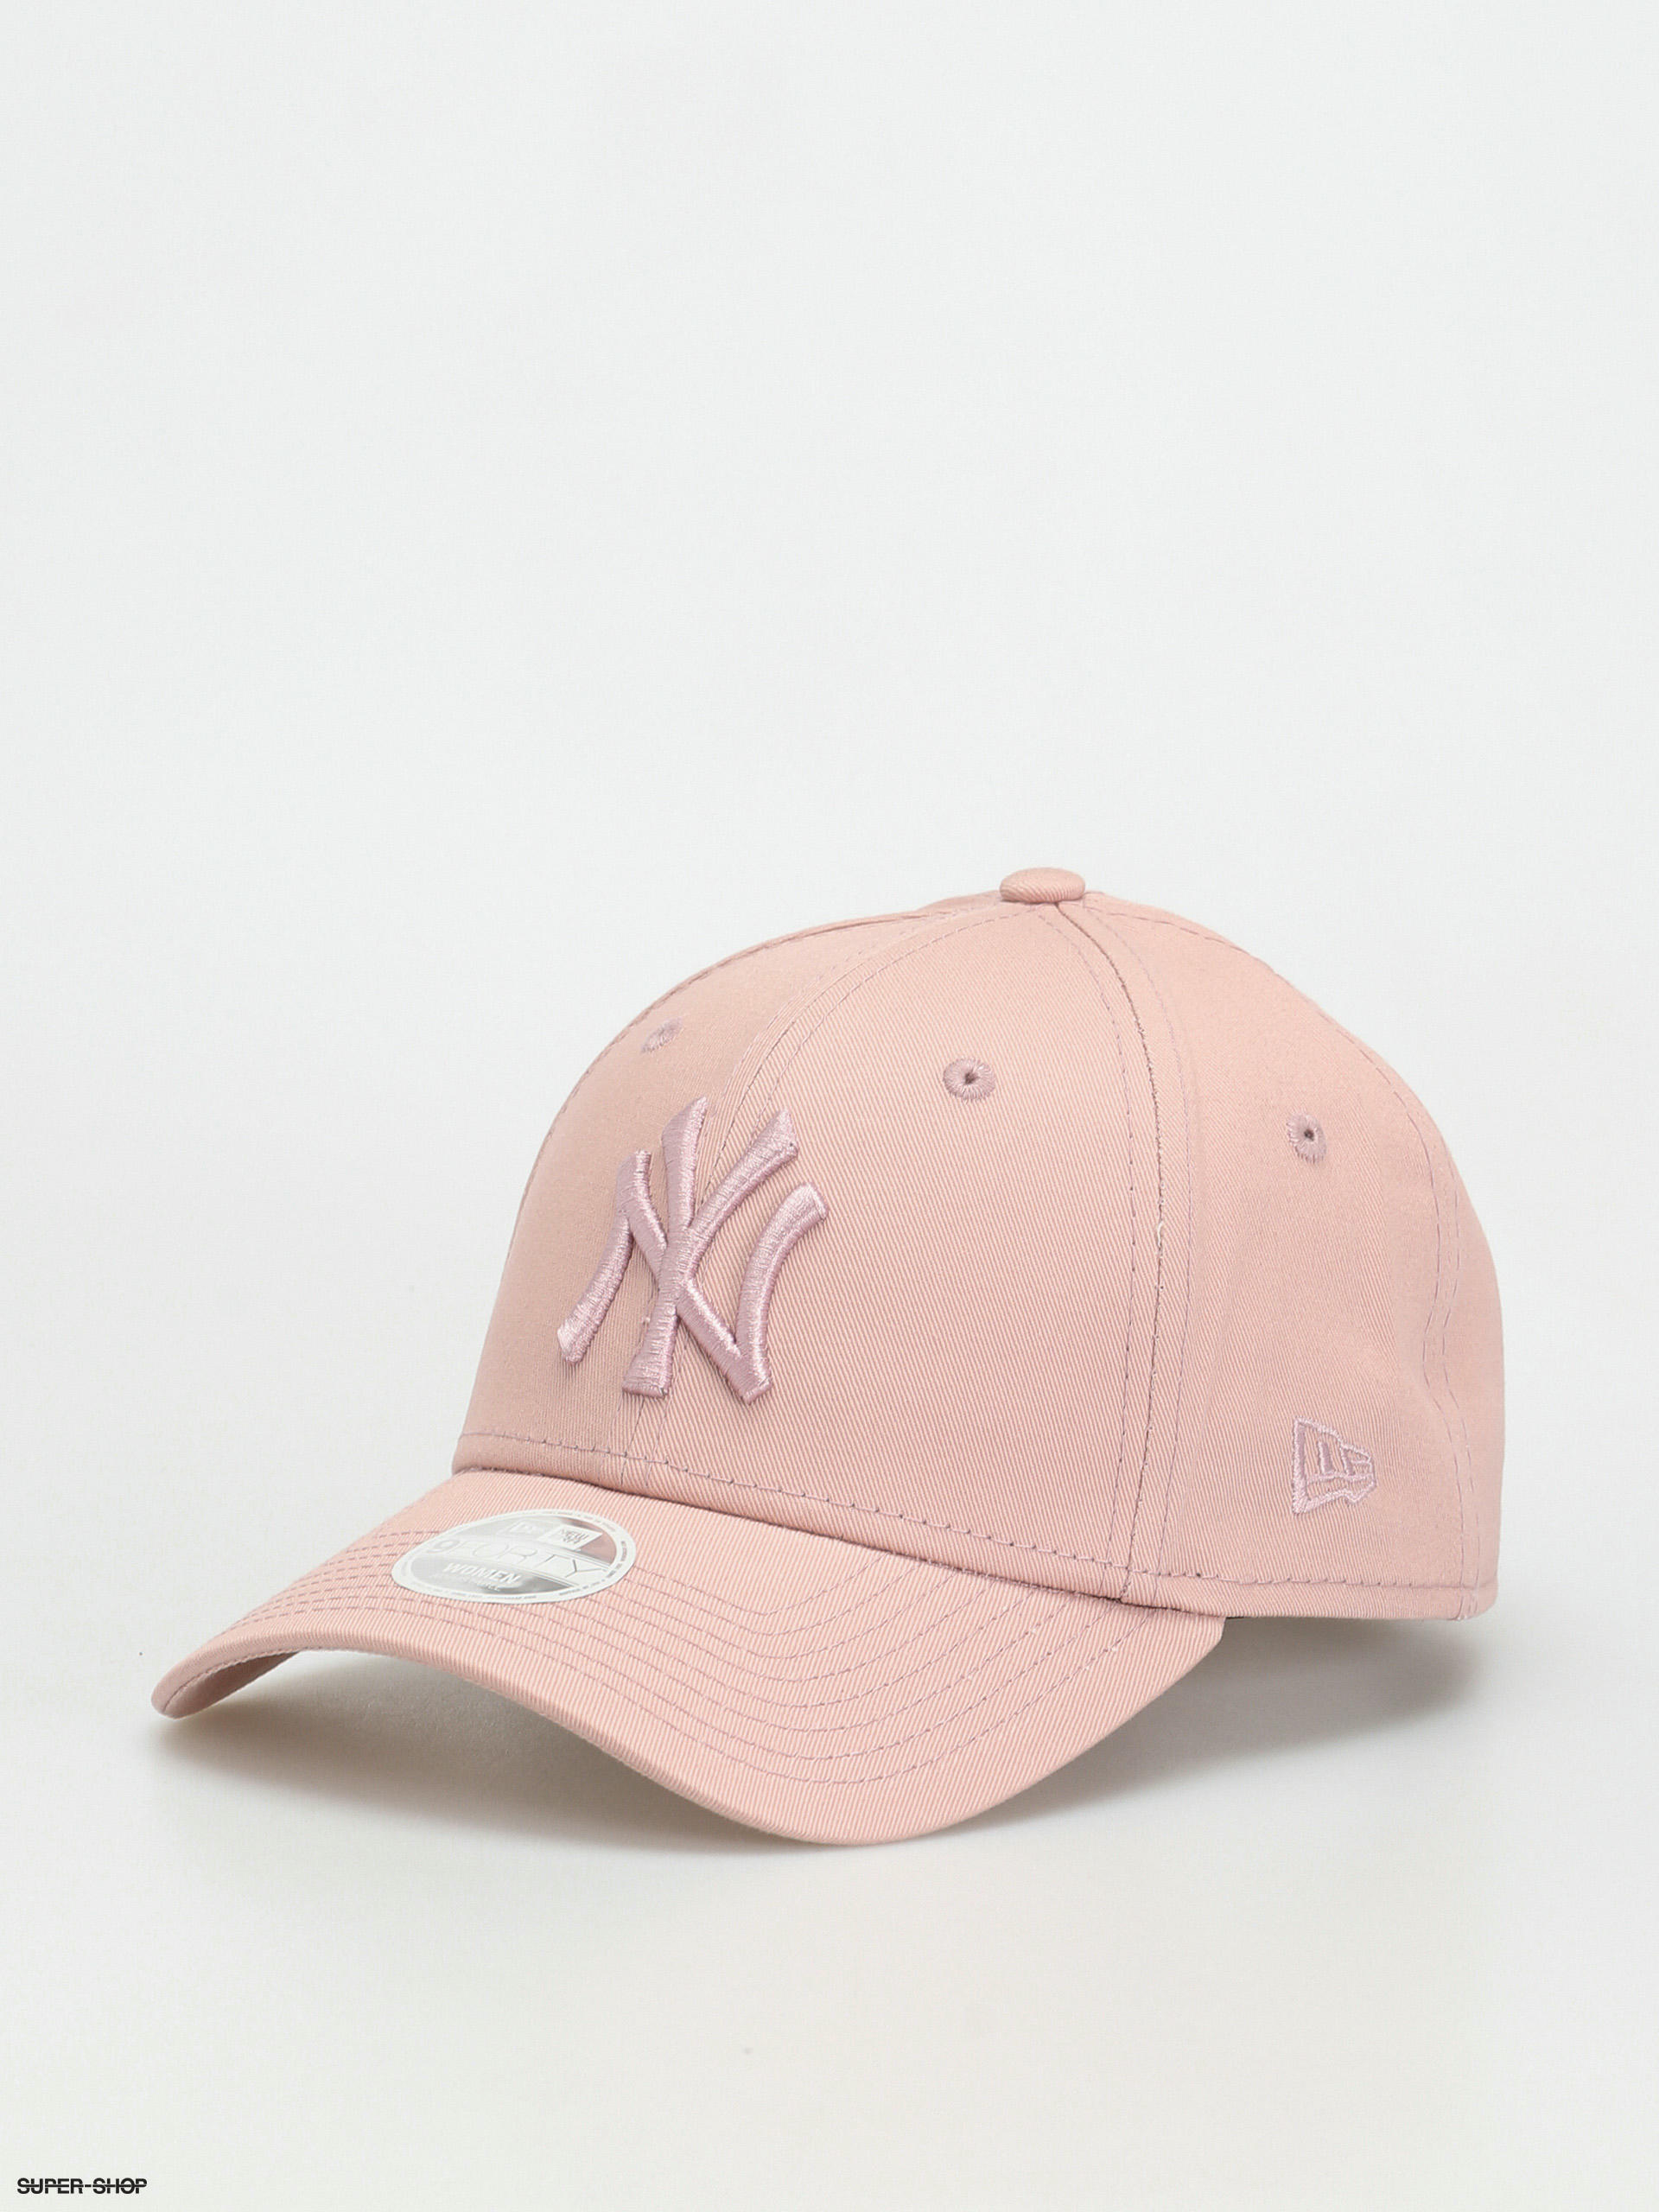 New Era League Essential 9Forty New York Yankees Cap Wmn (pink)